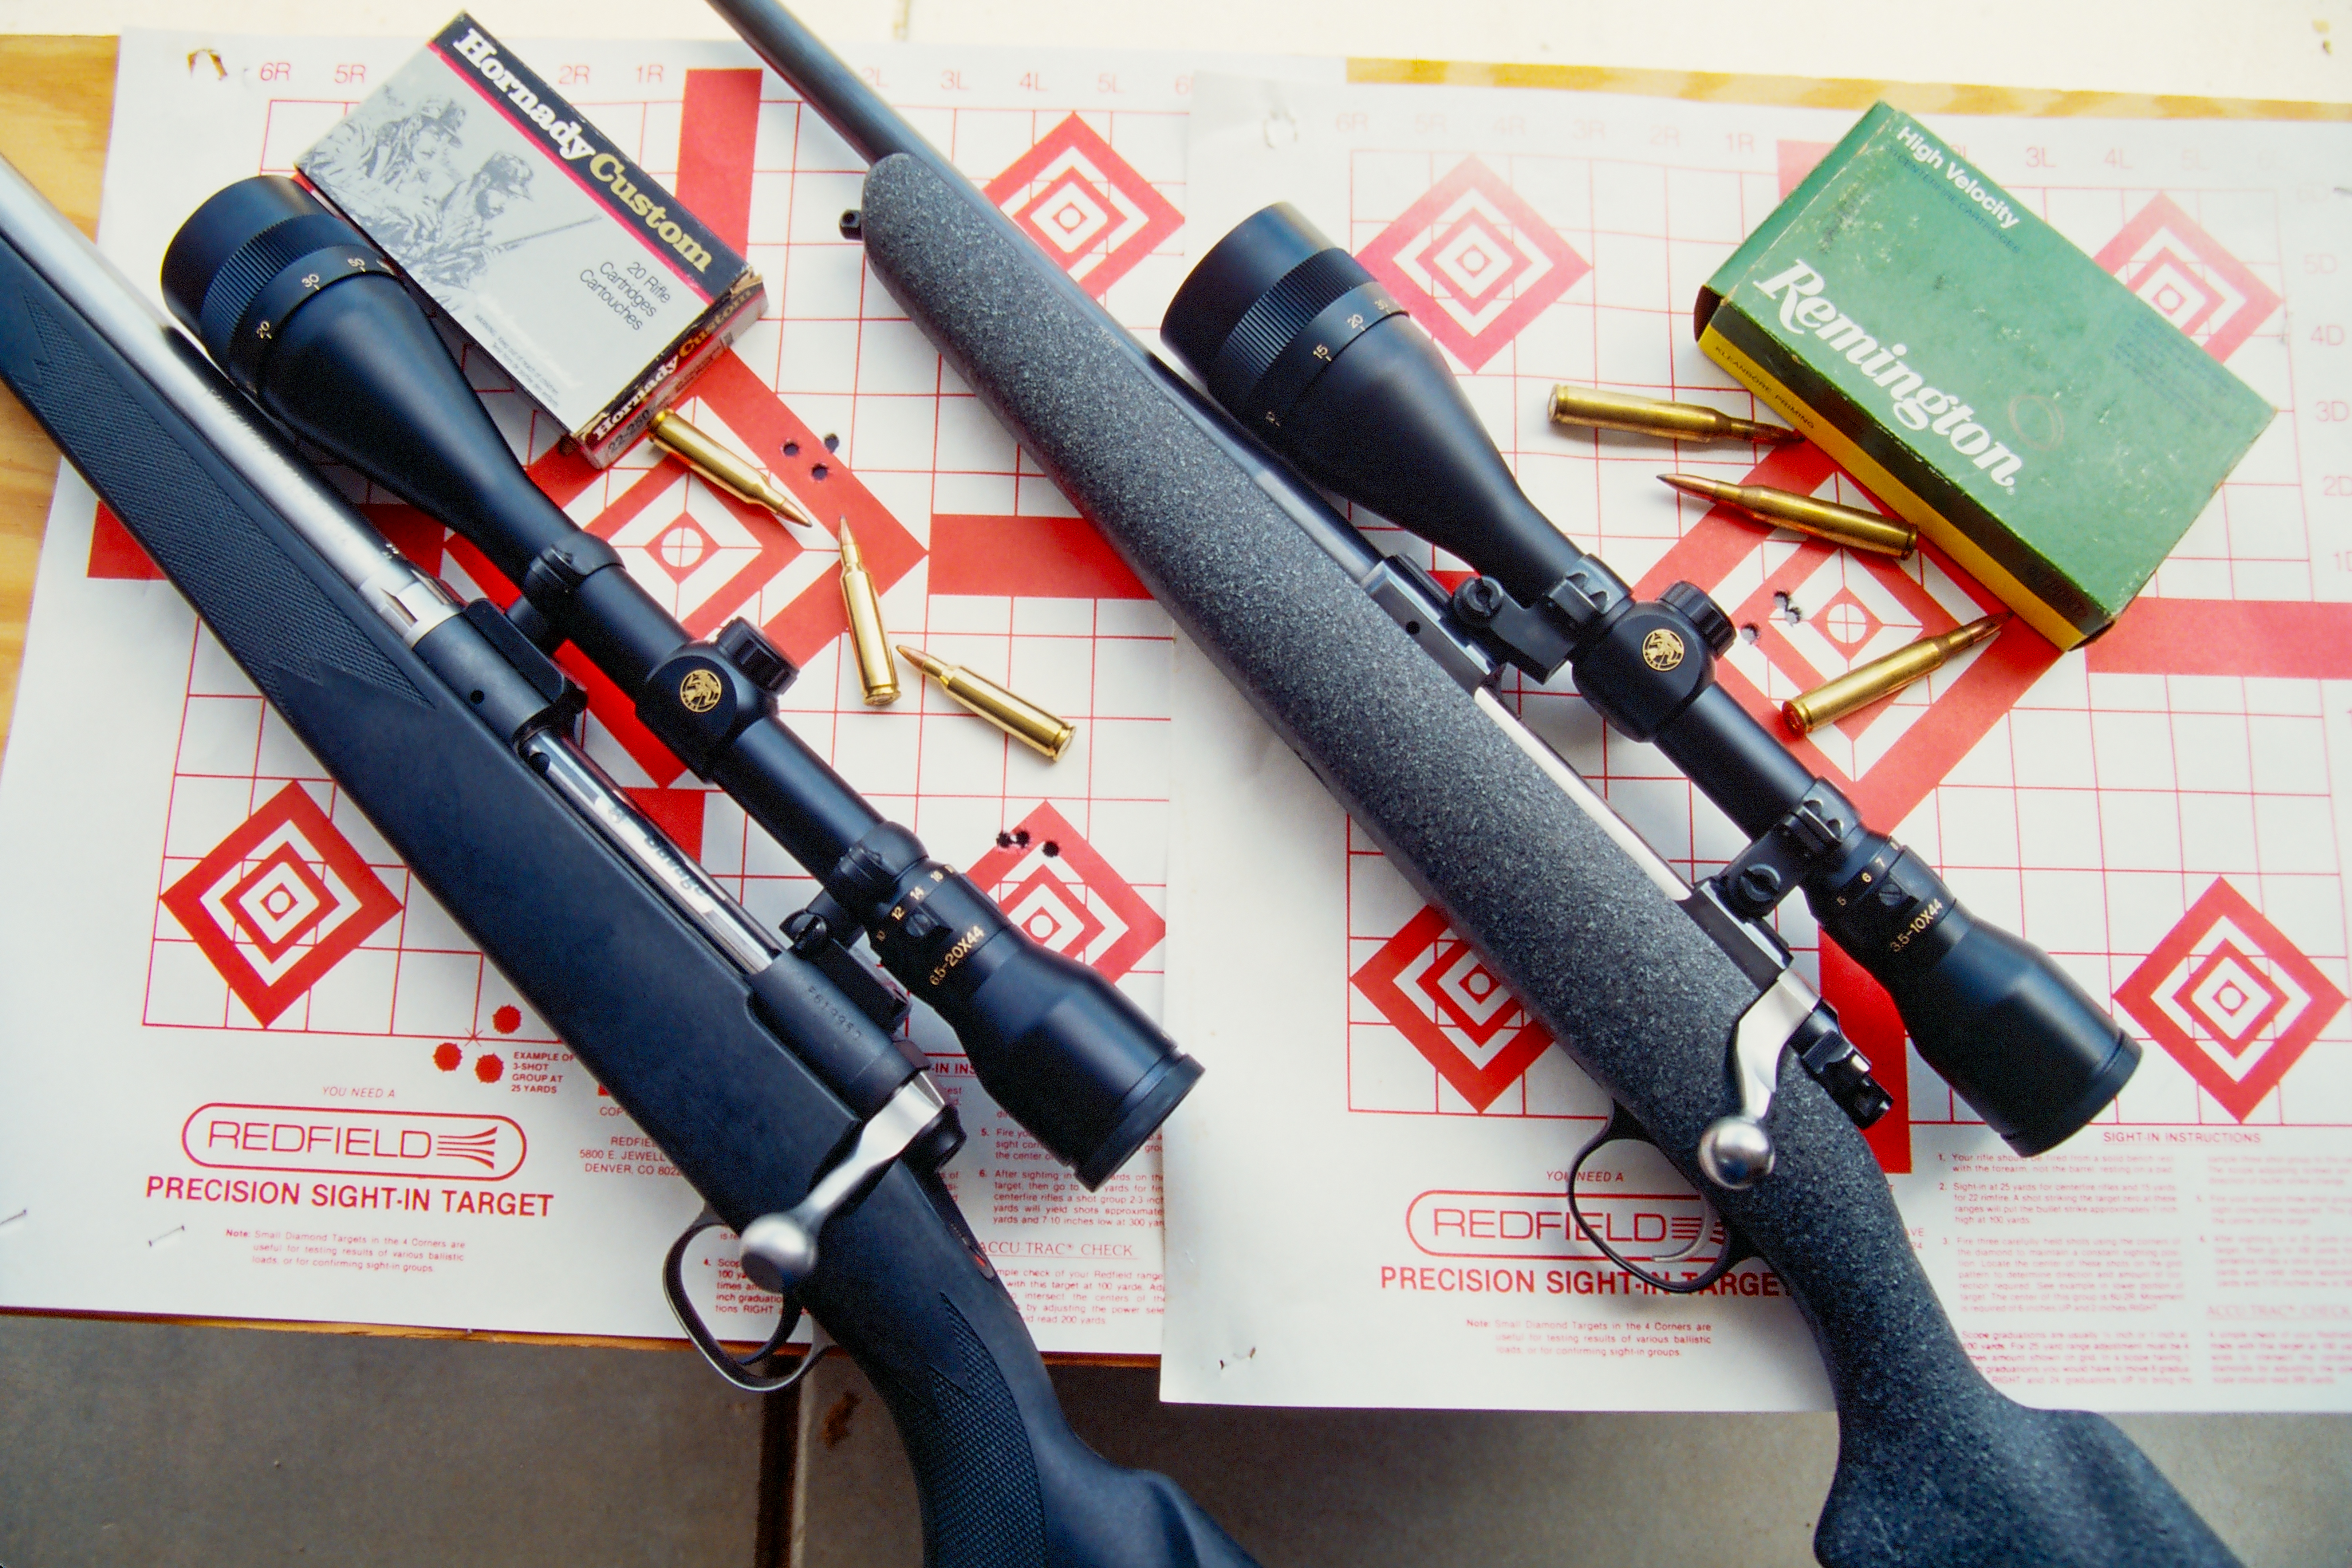 Left, a heavy-barreled .22-250; right, a .25-06. Both these rifles have the extreme accuracy needed for long-range varminting. A .25-06 with light bullets is probably the most powerful cartridge that makes sense for varminting. Above .22, a primary drawback is too much recoil.